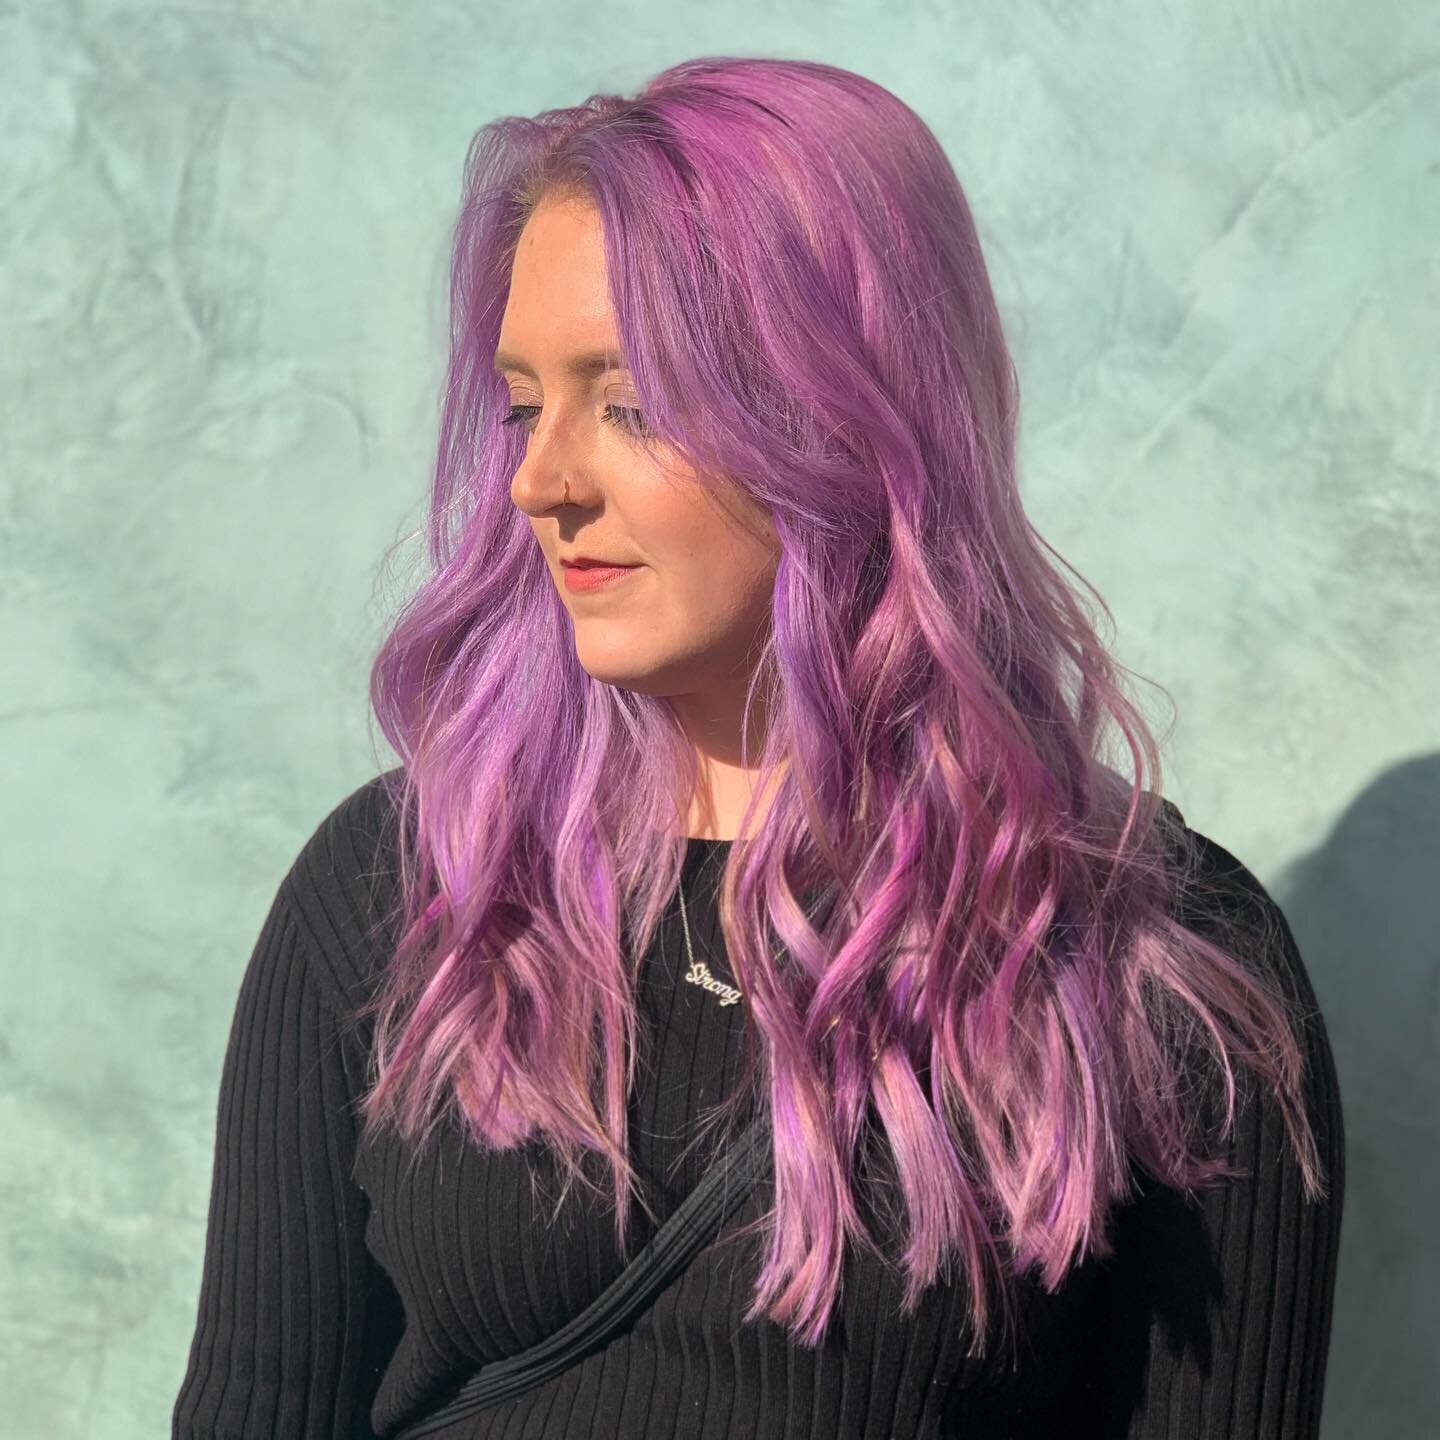 Afternoon glow ✨☀️ makes for the best pictures. &hearts;️
End goal for this beautiful vivid color - a dreamy shade of pastel lavender 🧜🏻&zwj;♀️ that will come after a few washes and natural fade.
That&rsquo;s another fun part about #vividcolor - yo